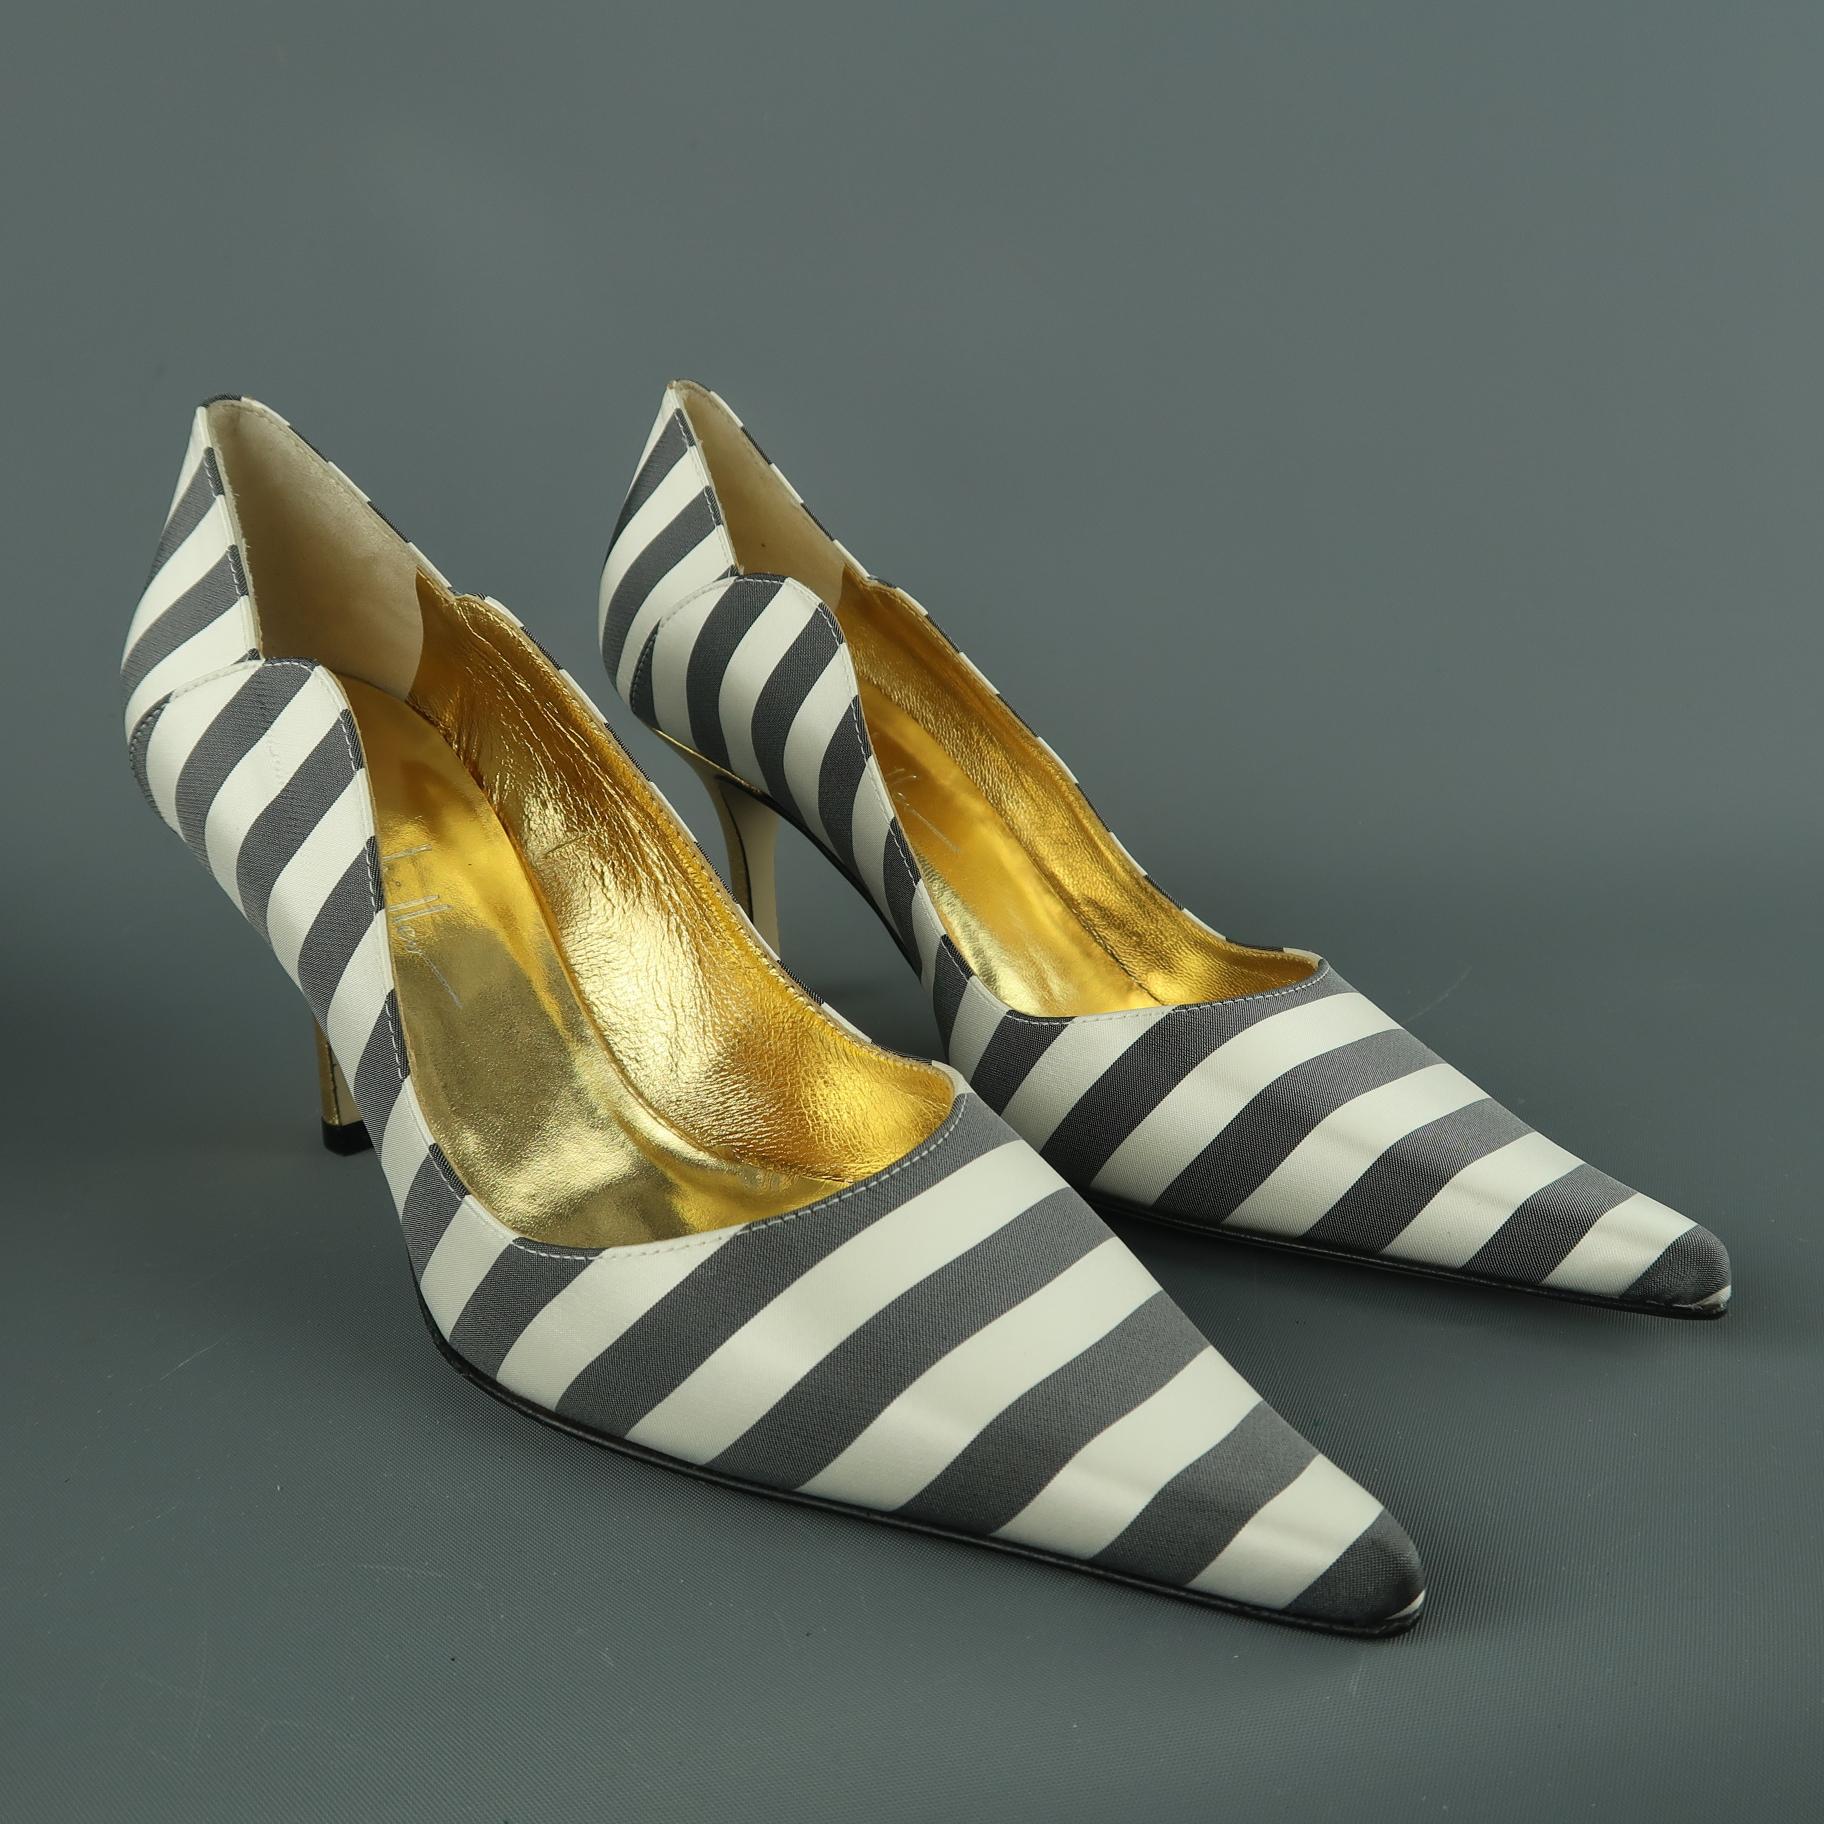 NICOLE MILLER ESTELLE pumps come in gray and white striped satin with a pointed toe and metallic gold leather heel. Made in Italy.

New With Box.
Marked: 7

Heel: 3 in.